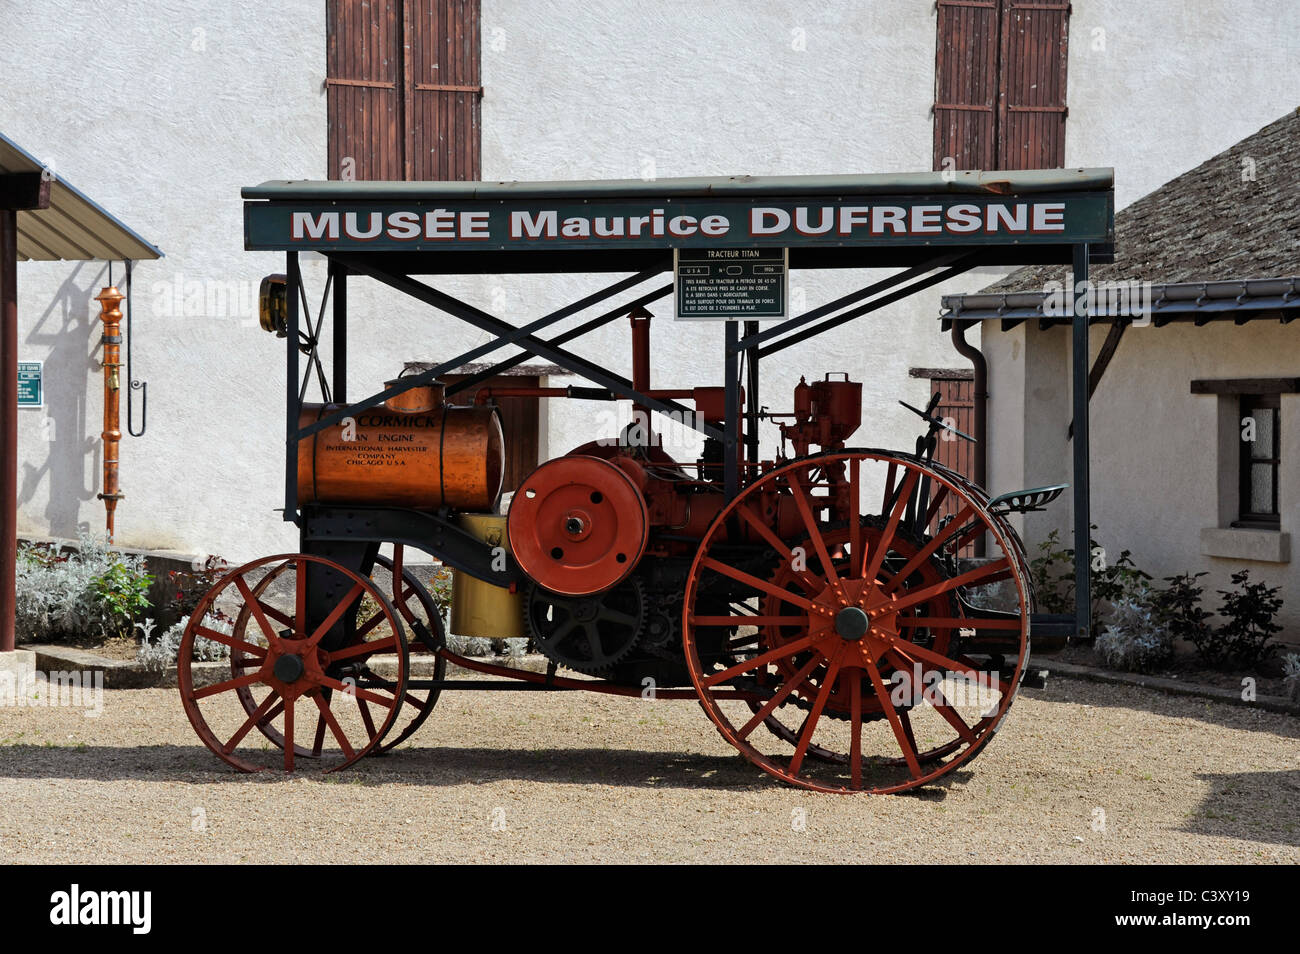 Musee Maurice Dufresne Museum in the Marnay mill,near Tours and Azay-le- rideau,Indre-et-Loire,Touraine,France Stock Photo - Alamy